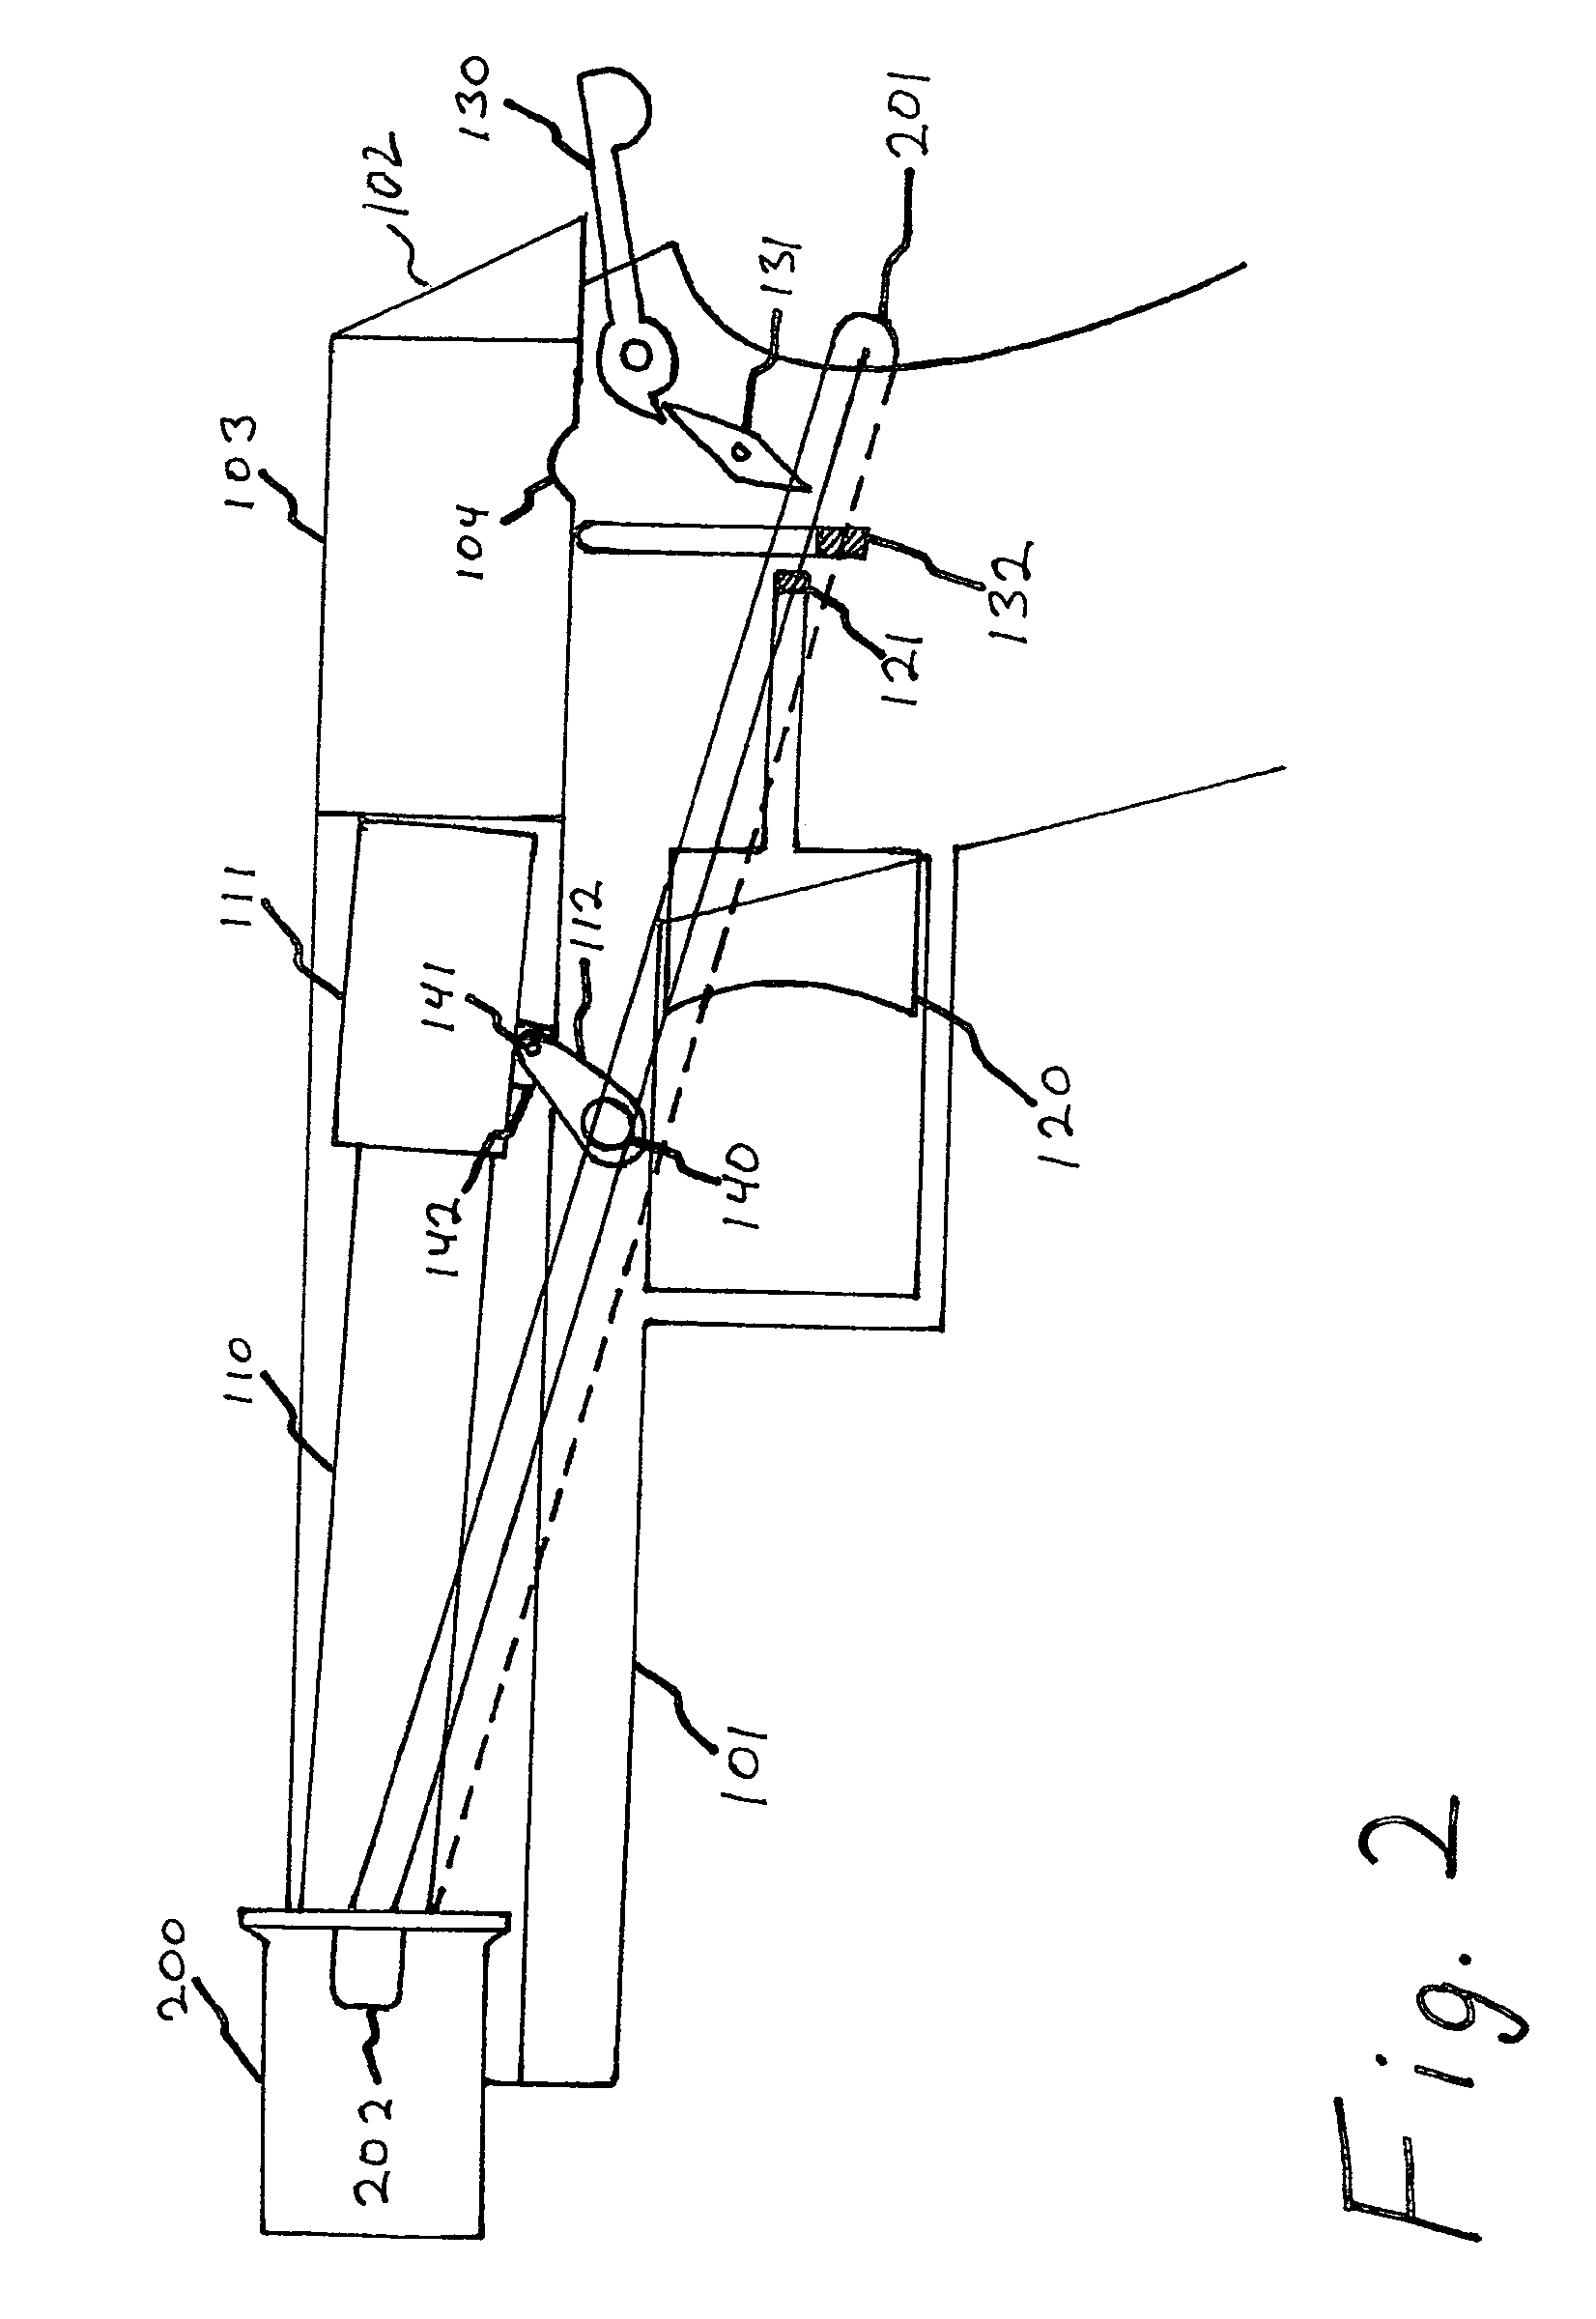 Firearm safety device and method of using same